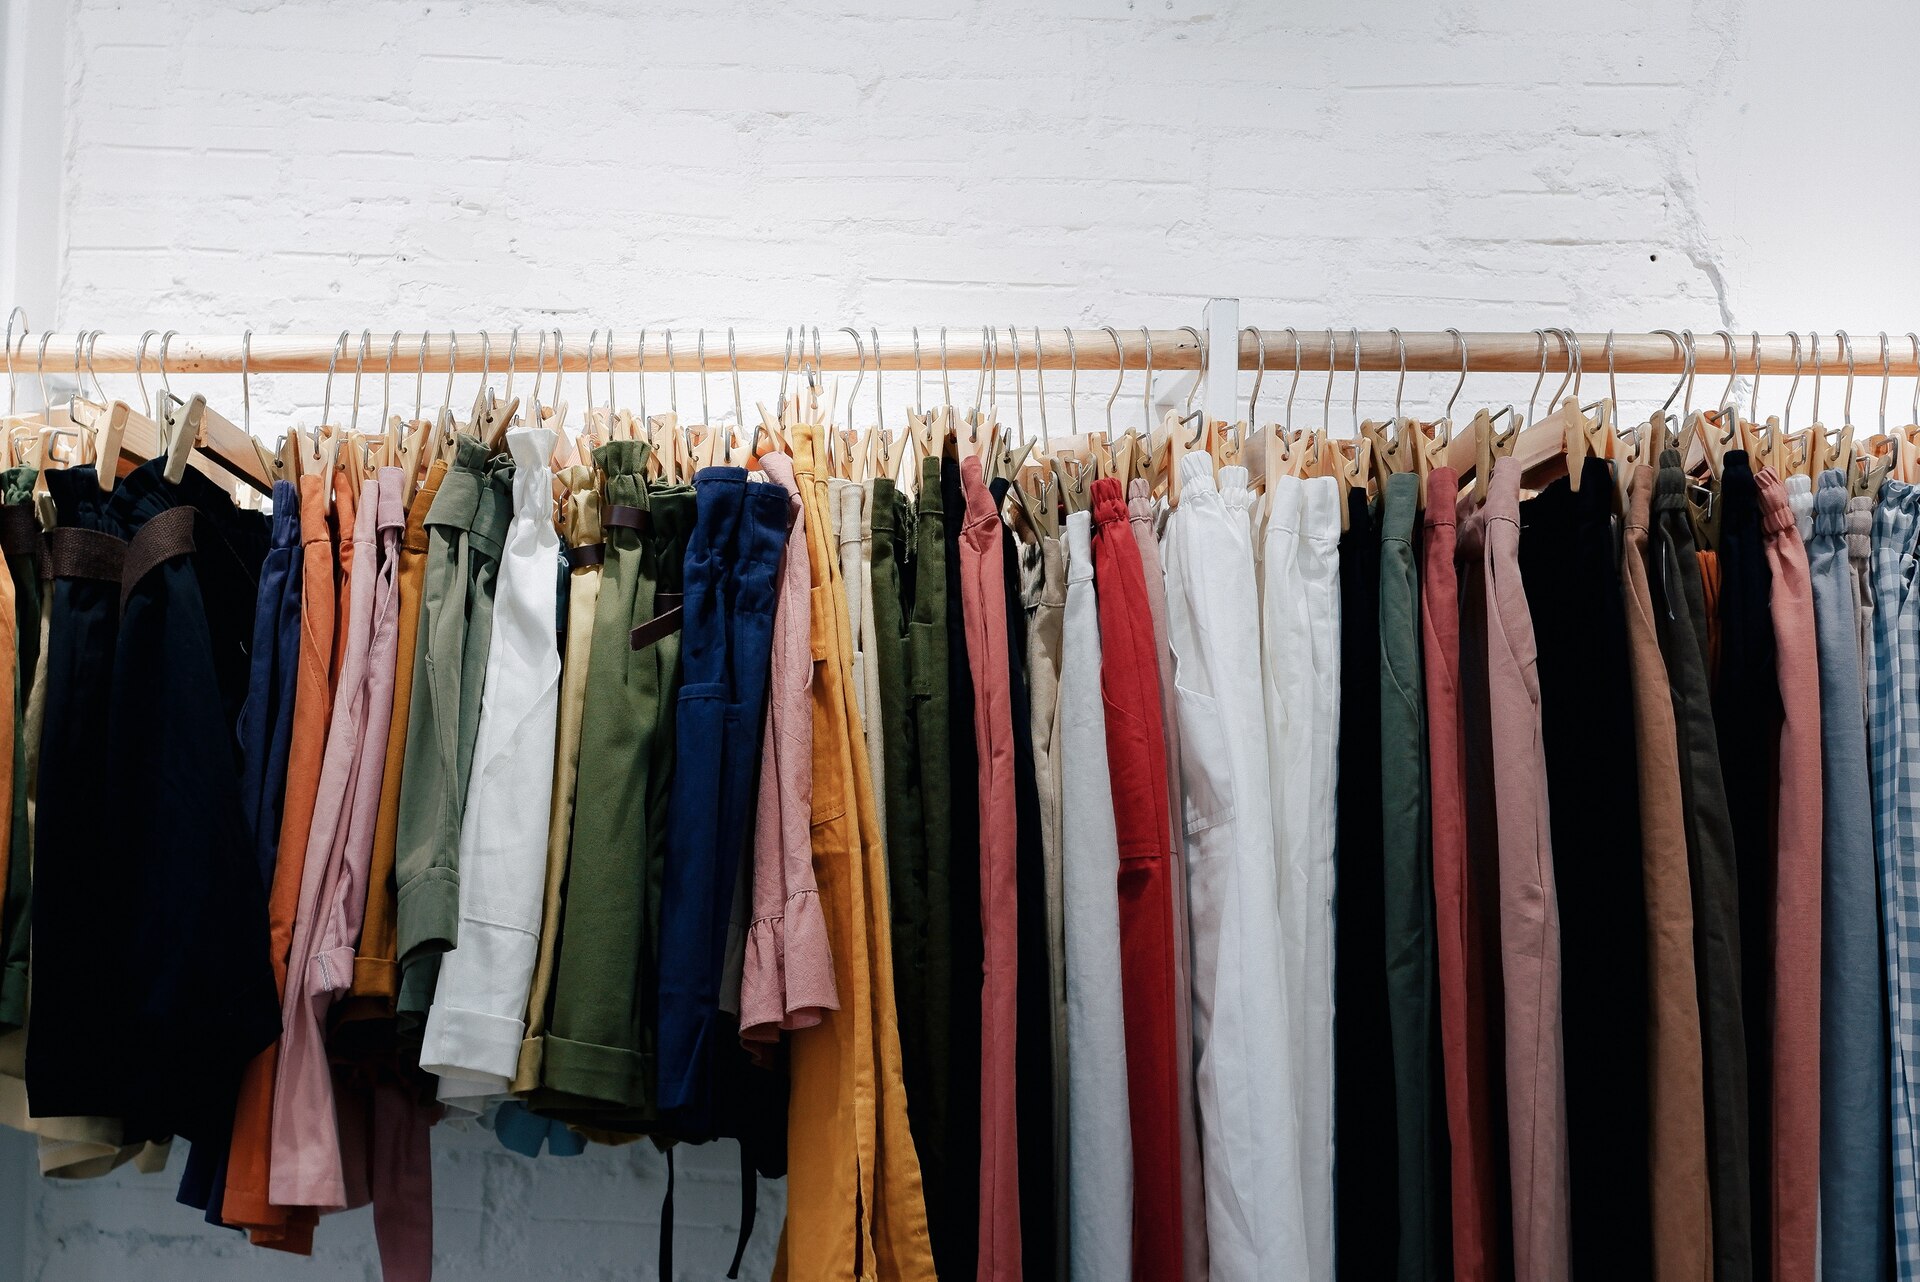 Rack displaying a variety of clothes, neatly hung and organized for easy access.